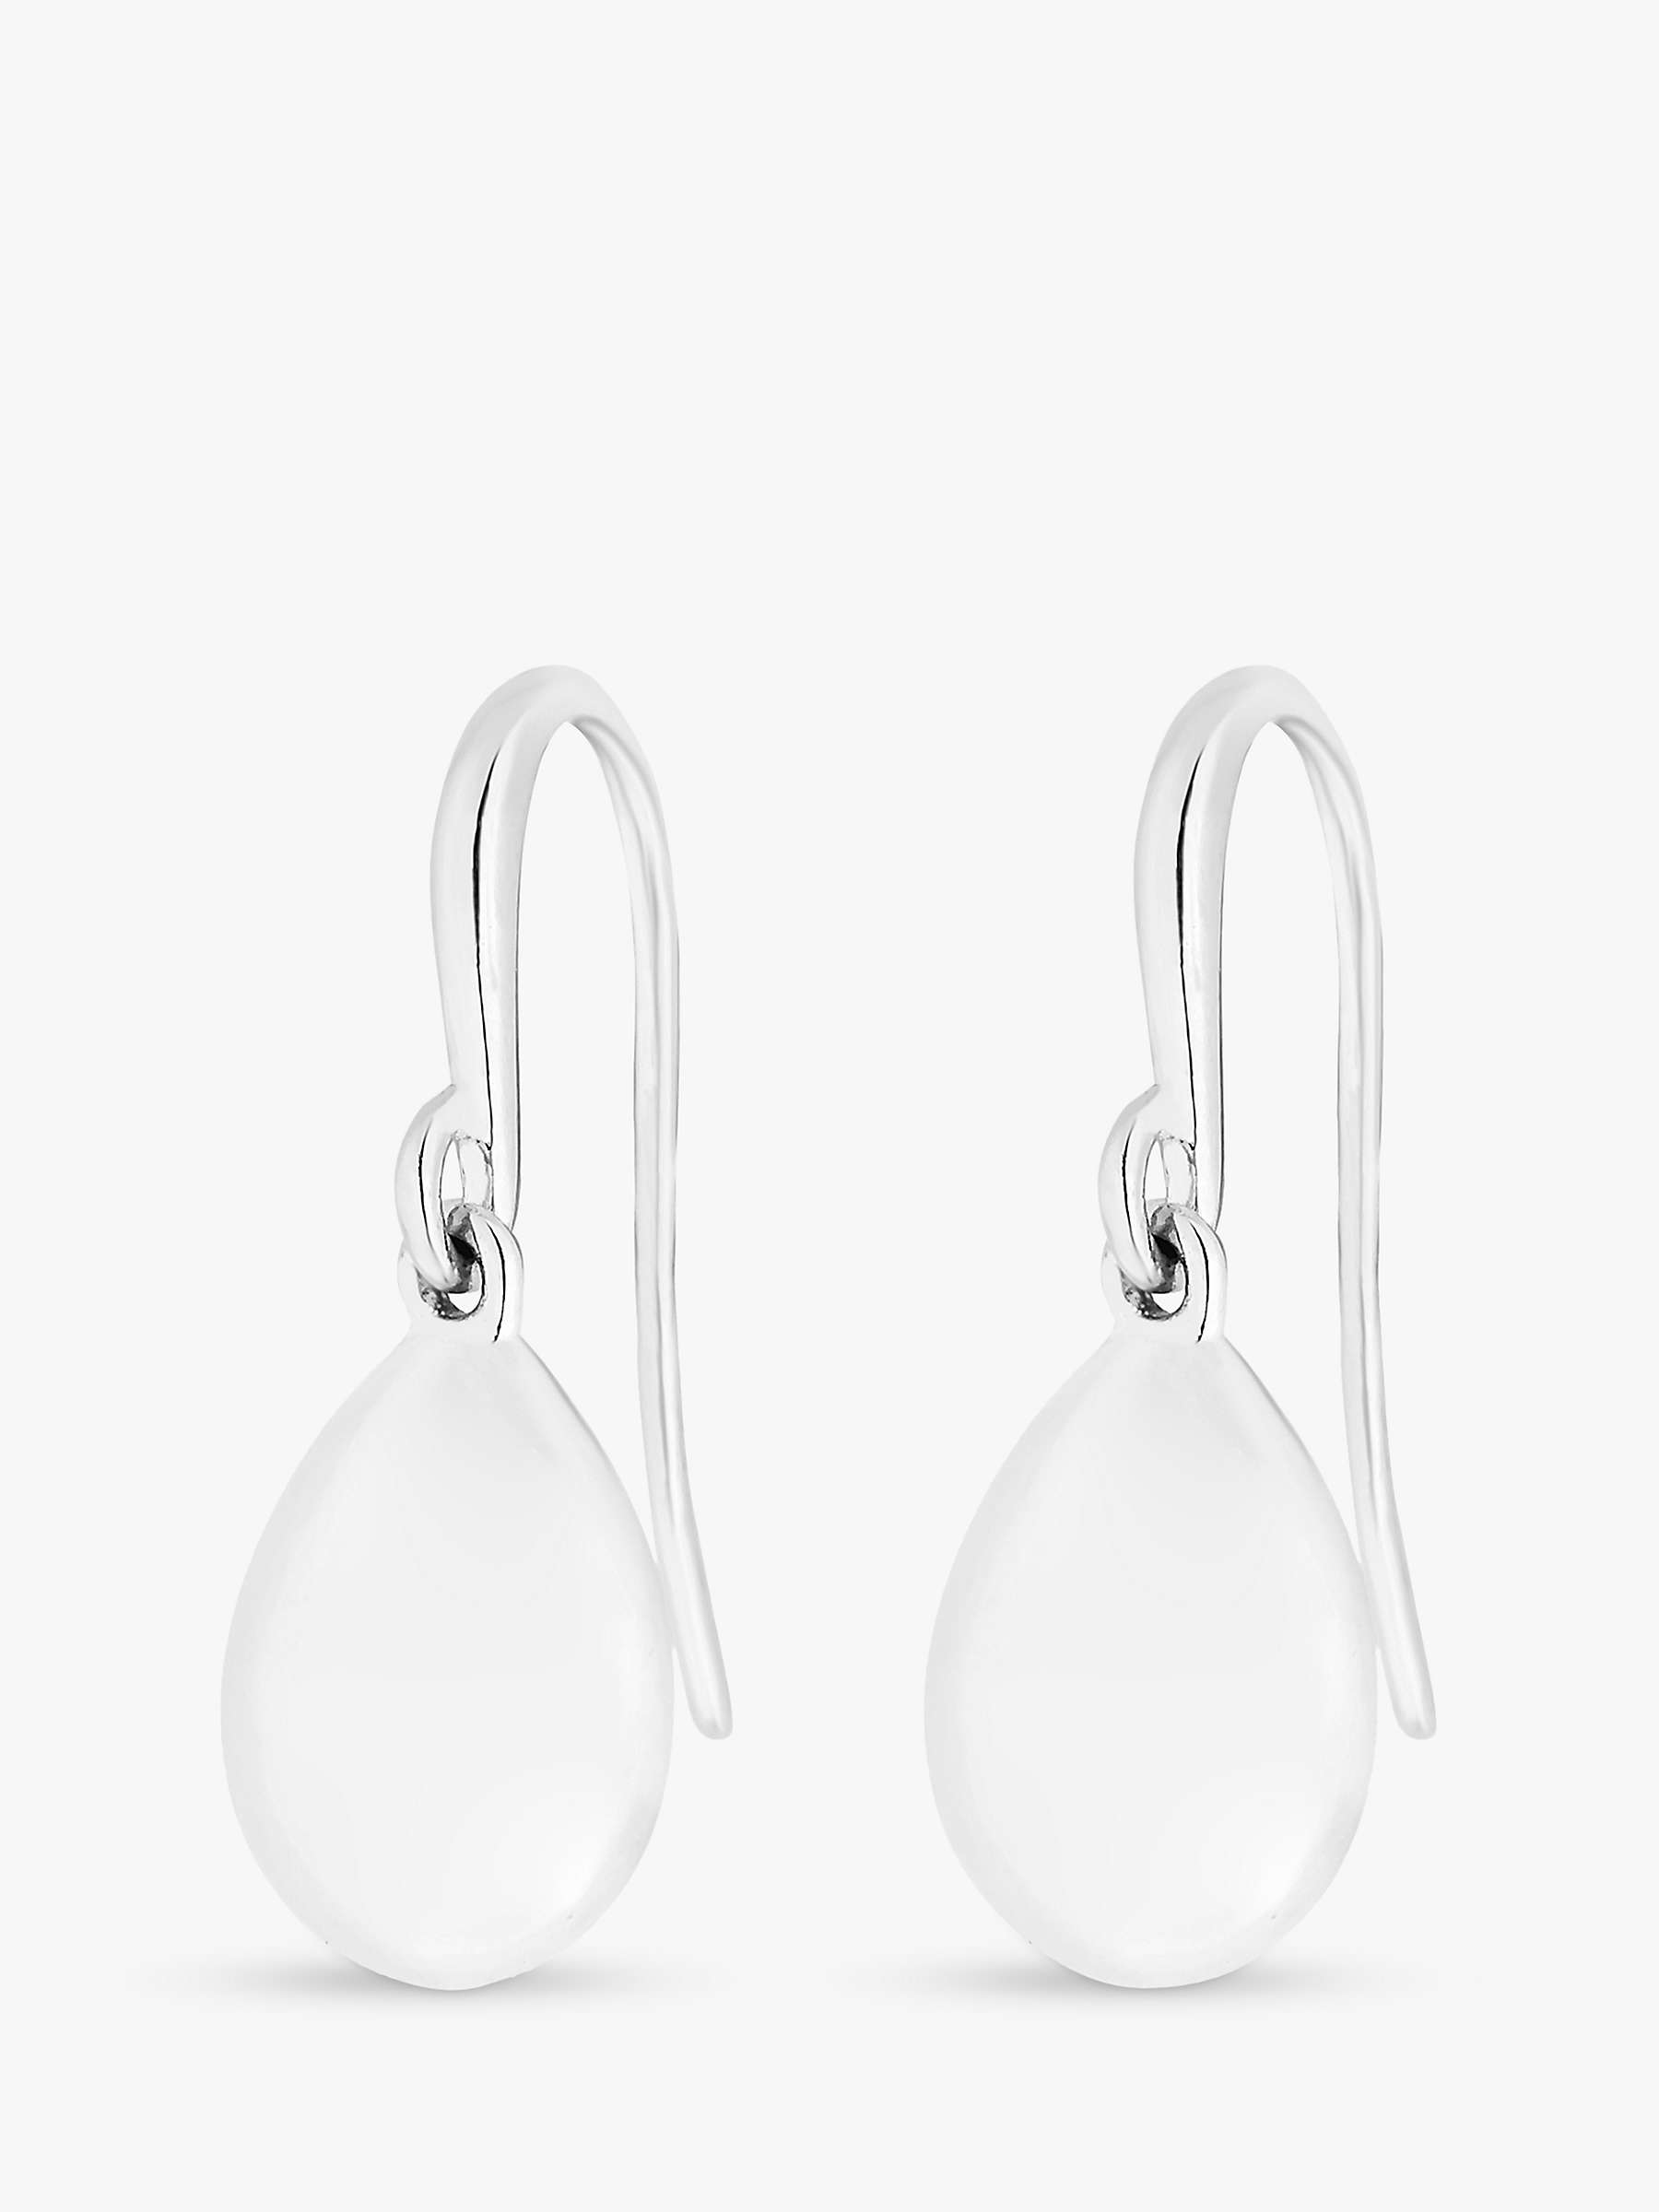 Buy Simply Silver Sterling Silver 925 Polished Pear Bead Drop Earrings, Silver Online at johnlewis.com